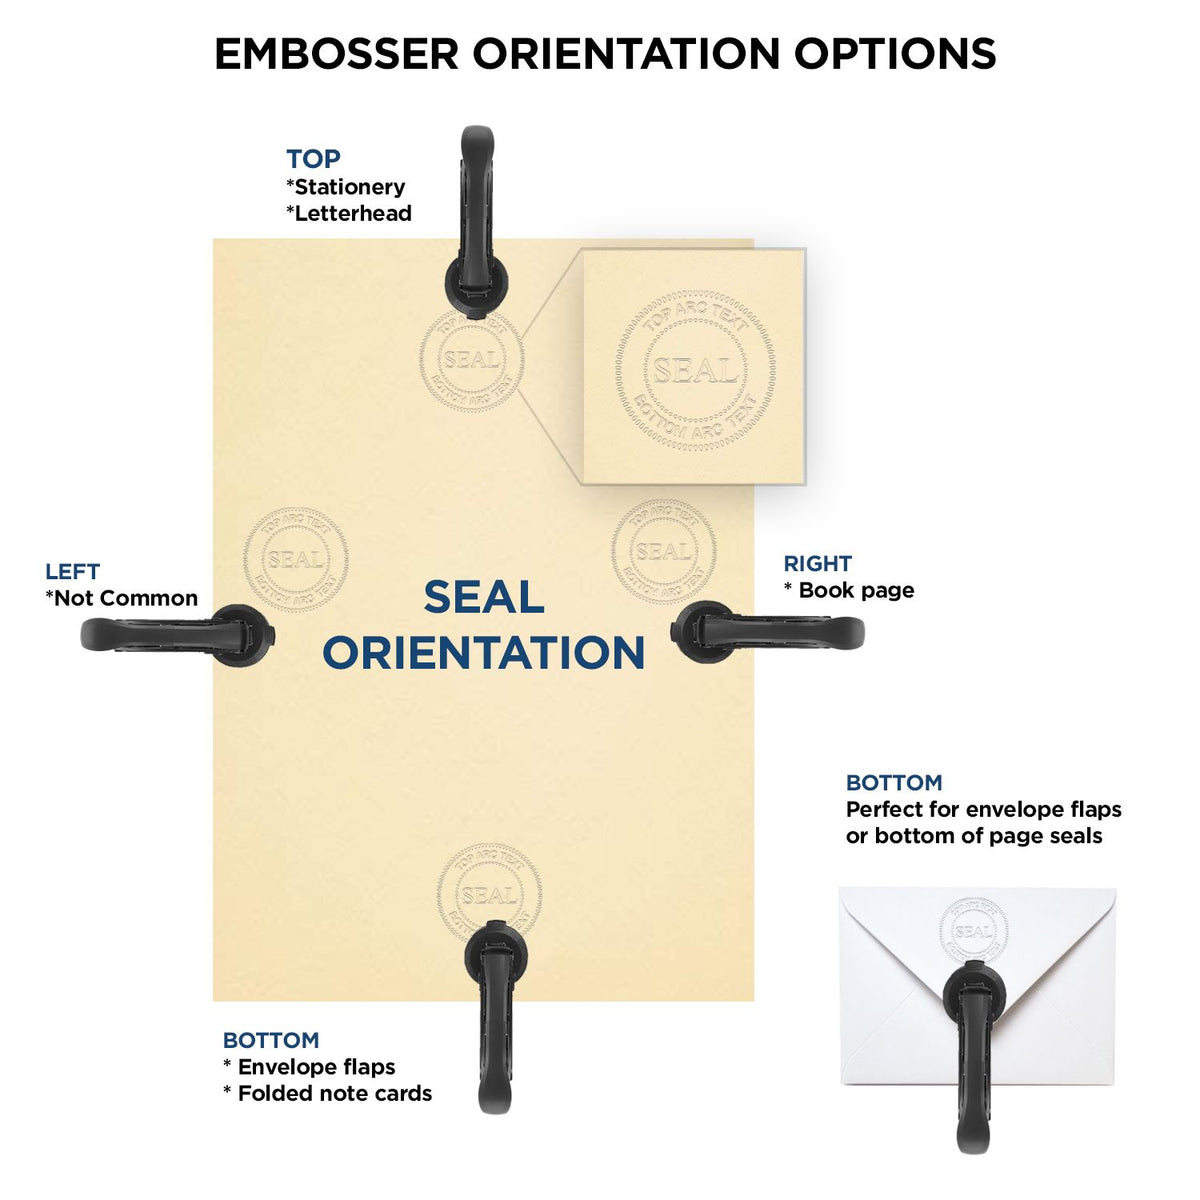 An infographic for the Extended Long Reach Massachusetts Surveyor Embosser showing embosser orientation, this is showing examples of a top, bottom, right and left insert.